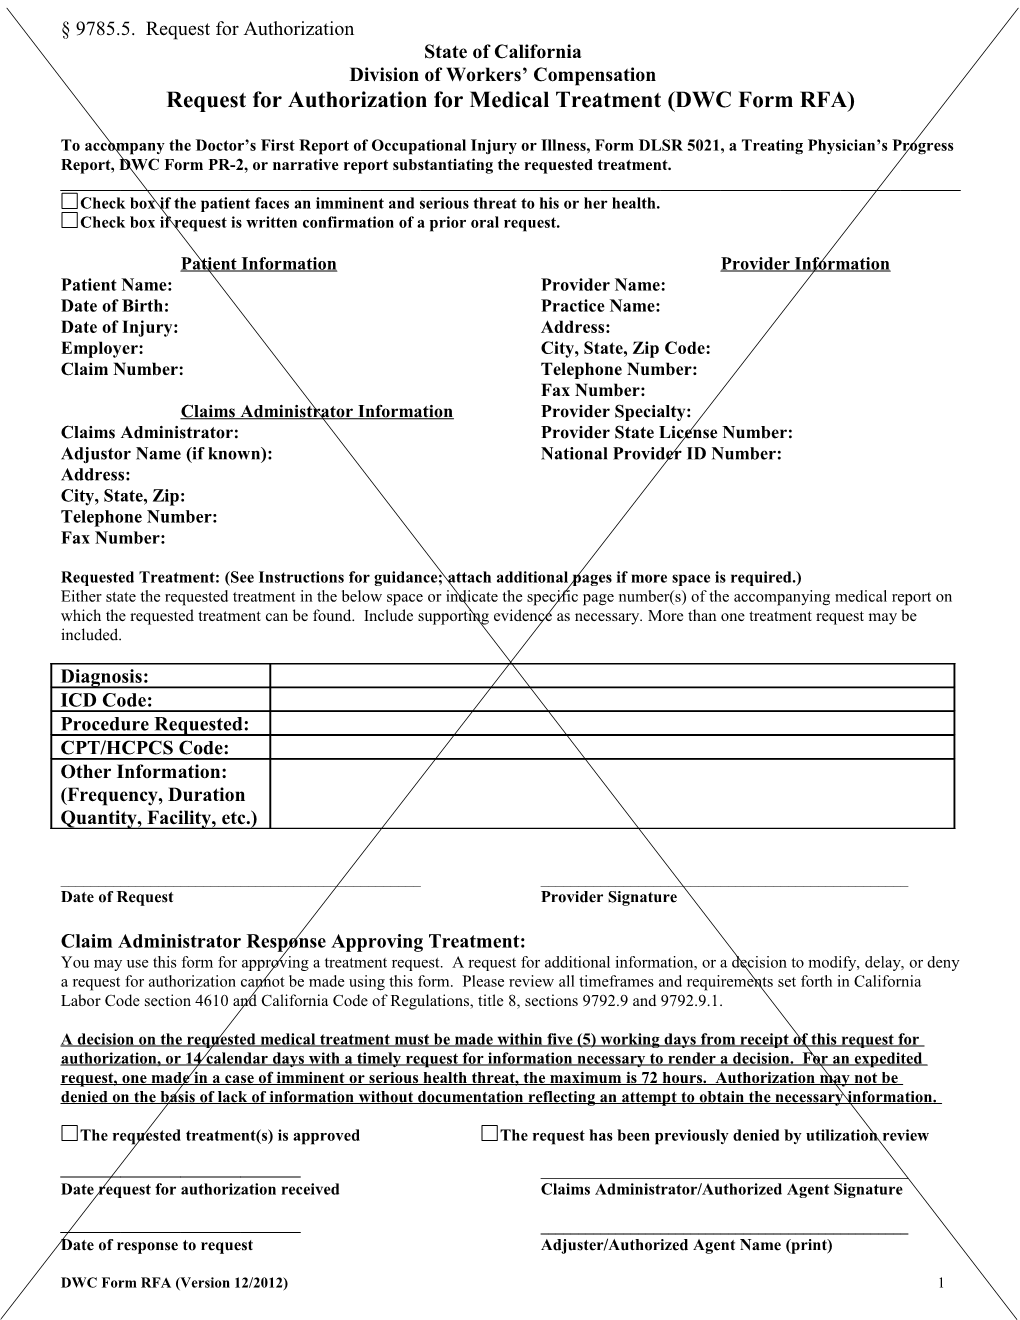 Request for Authorization for Medical Treatment (DWC Form RFA) s1